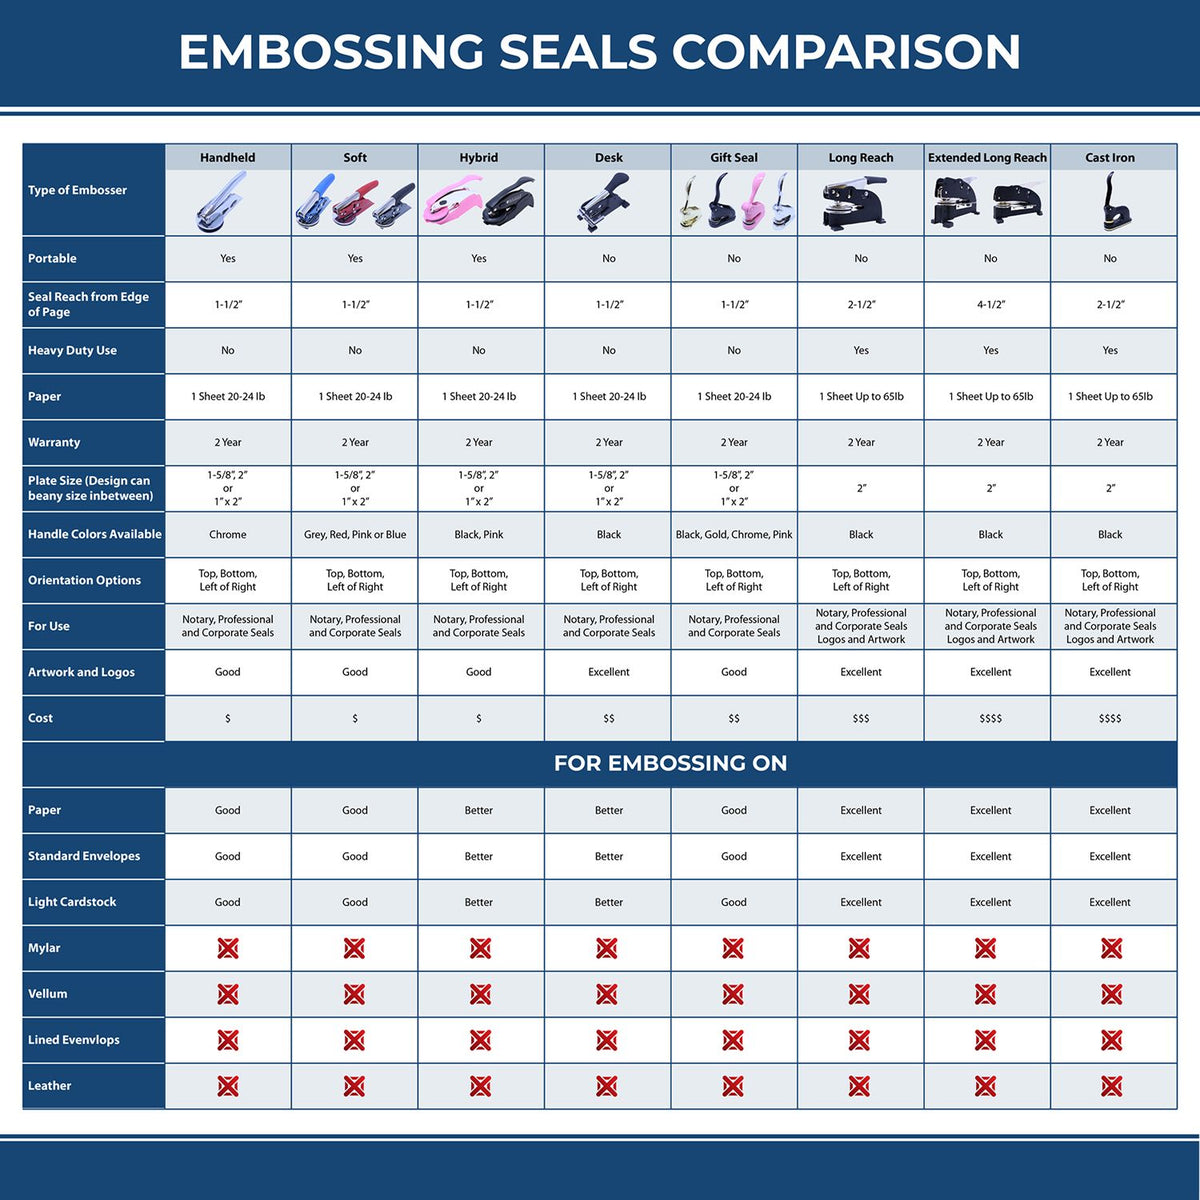 A comparison chart for the different types of mount models available for the State of Vermont Long Reach Architectural Embossing Seal.